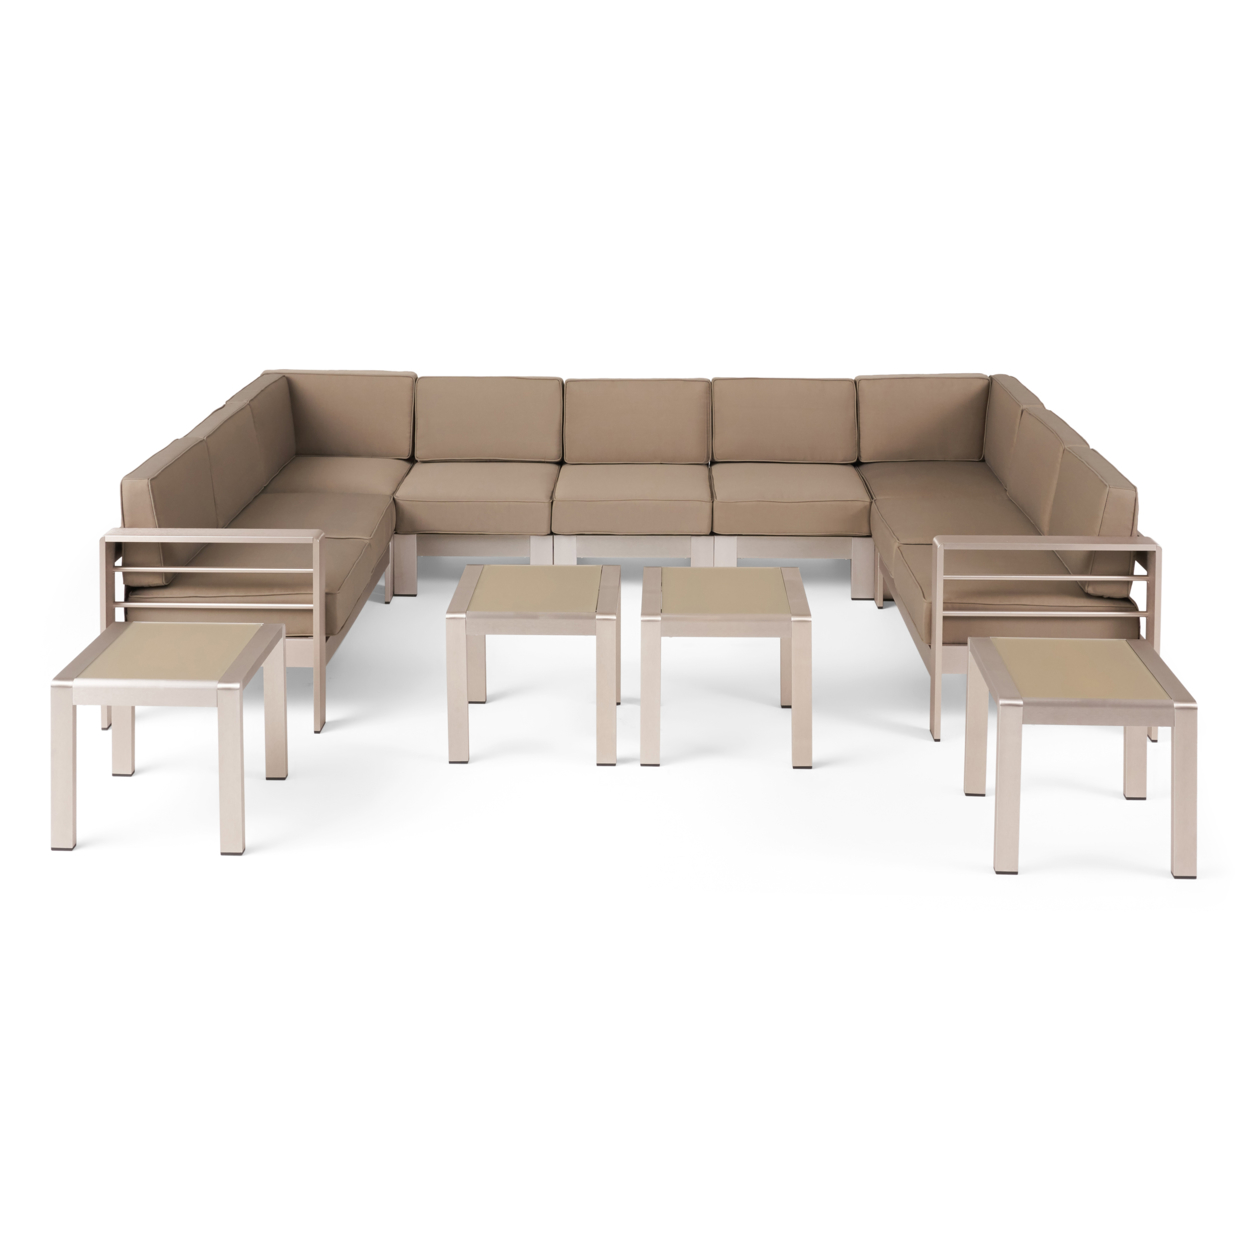 Brianna Outdoor 9 Seater Aluminum Sectional Sofa Set With Side Tables